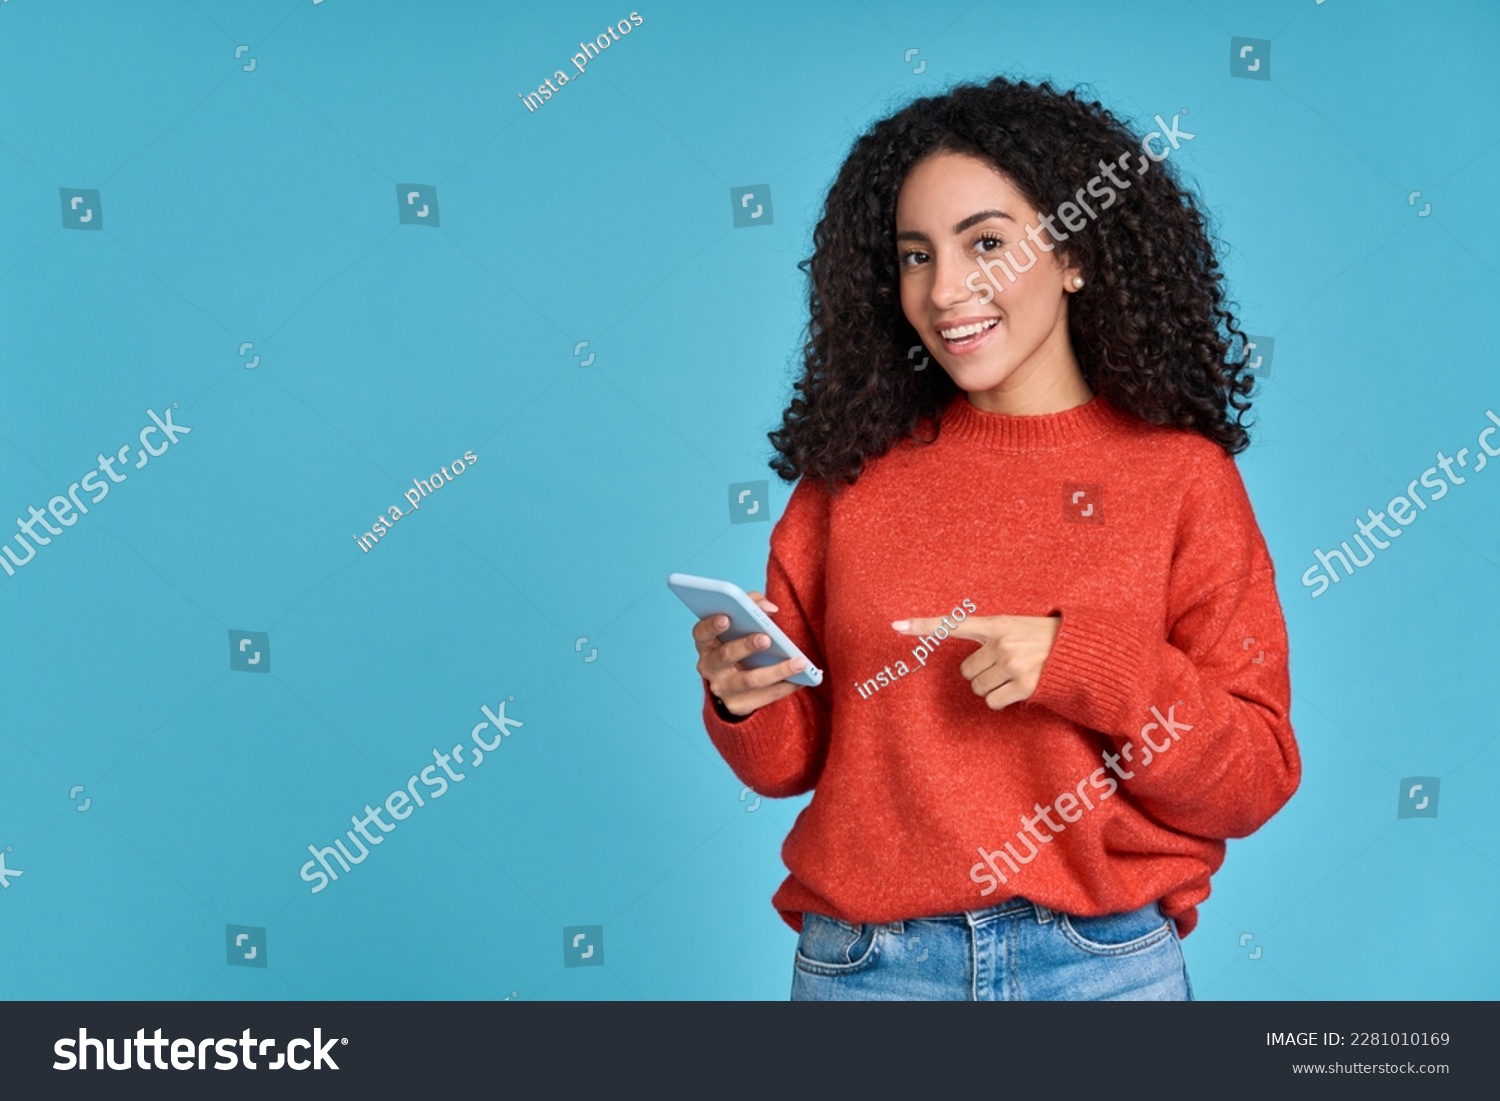 Young happy excited latin woman pointing at mobile phone isolated on blue background. Smiling female model holding cellphone using cell presenting advertising new trendy application concept. #2281010169